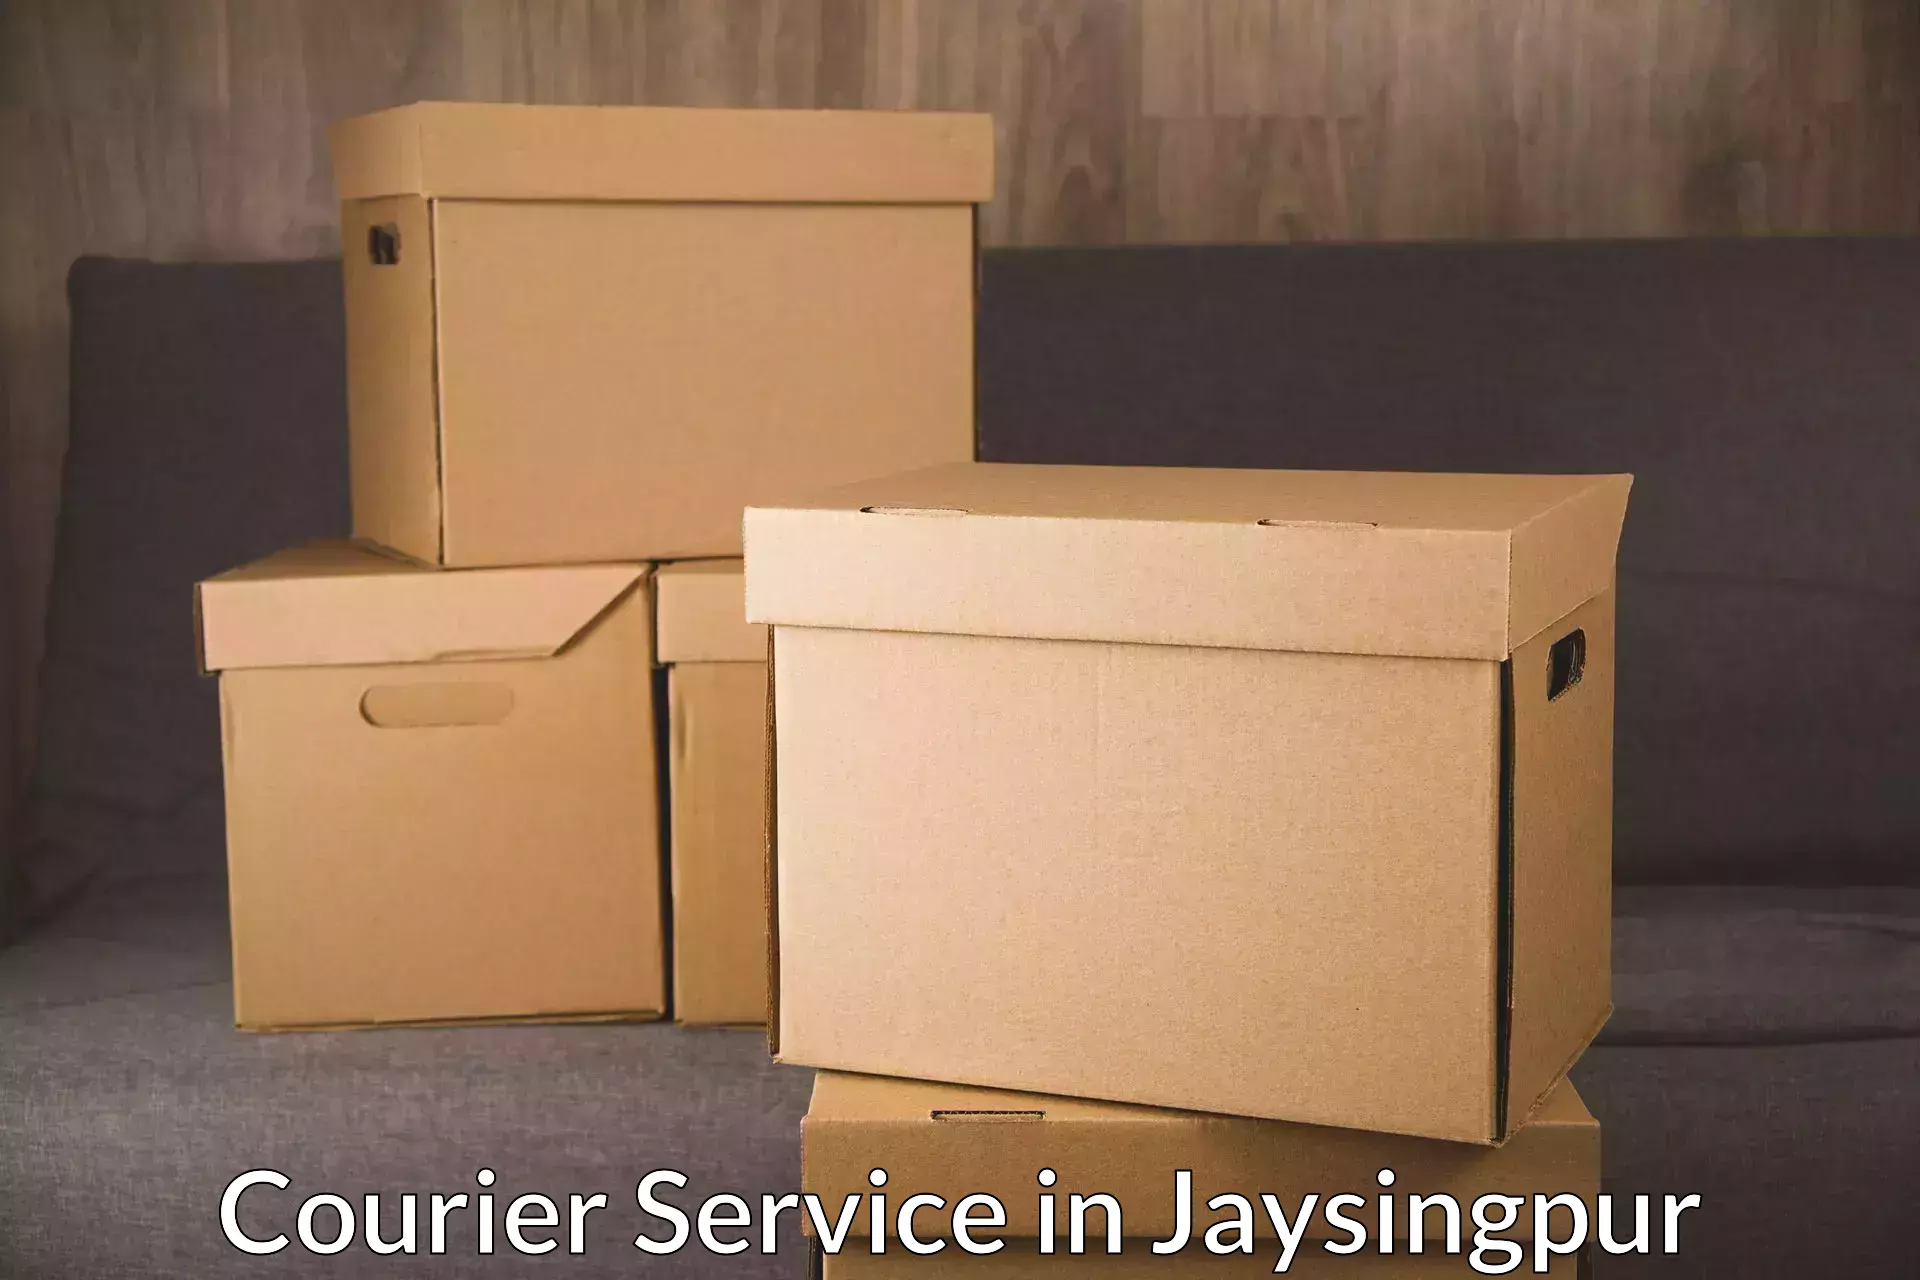 High value parcel delivery in Jaysingpur